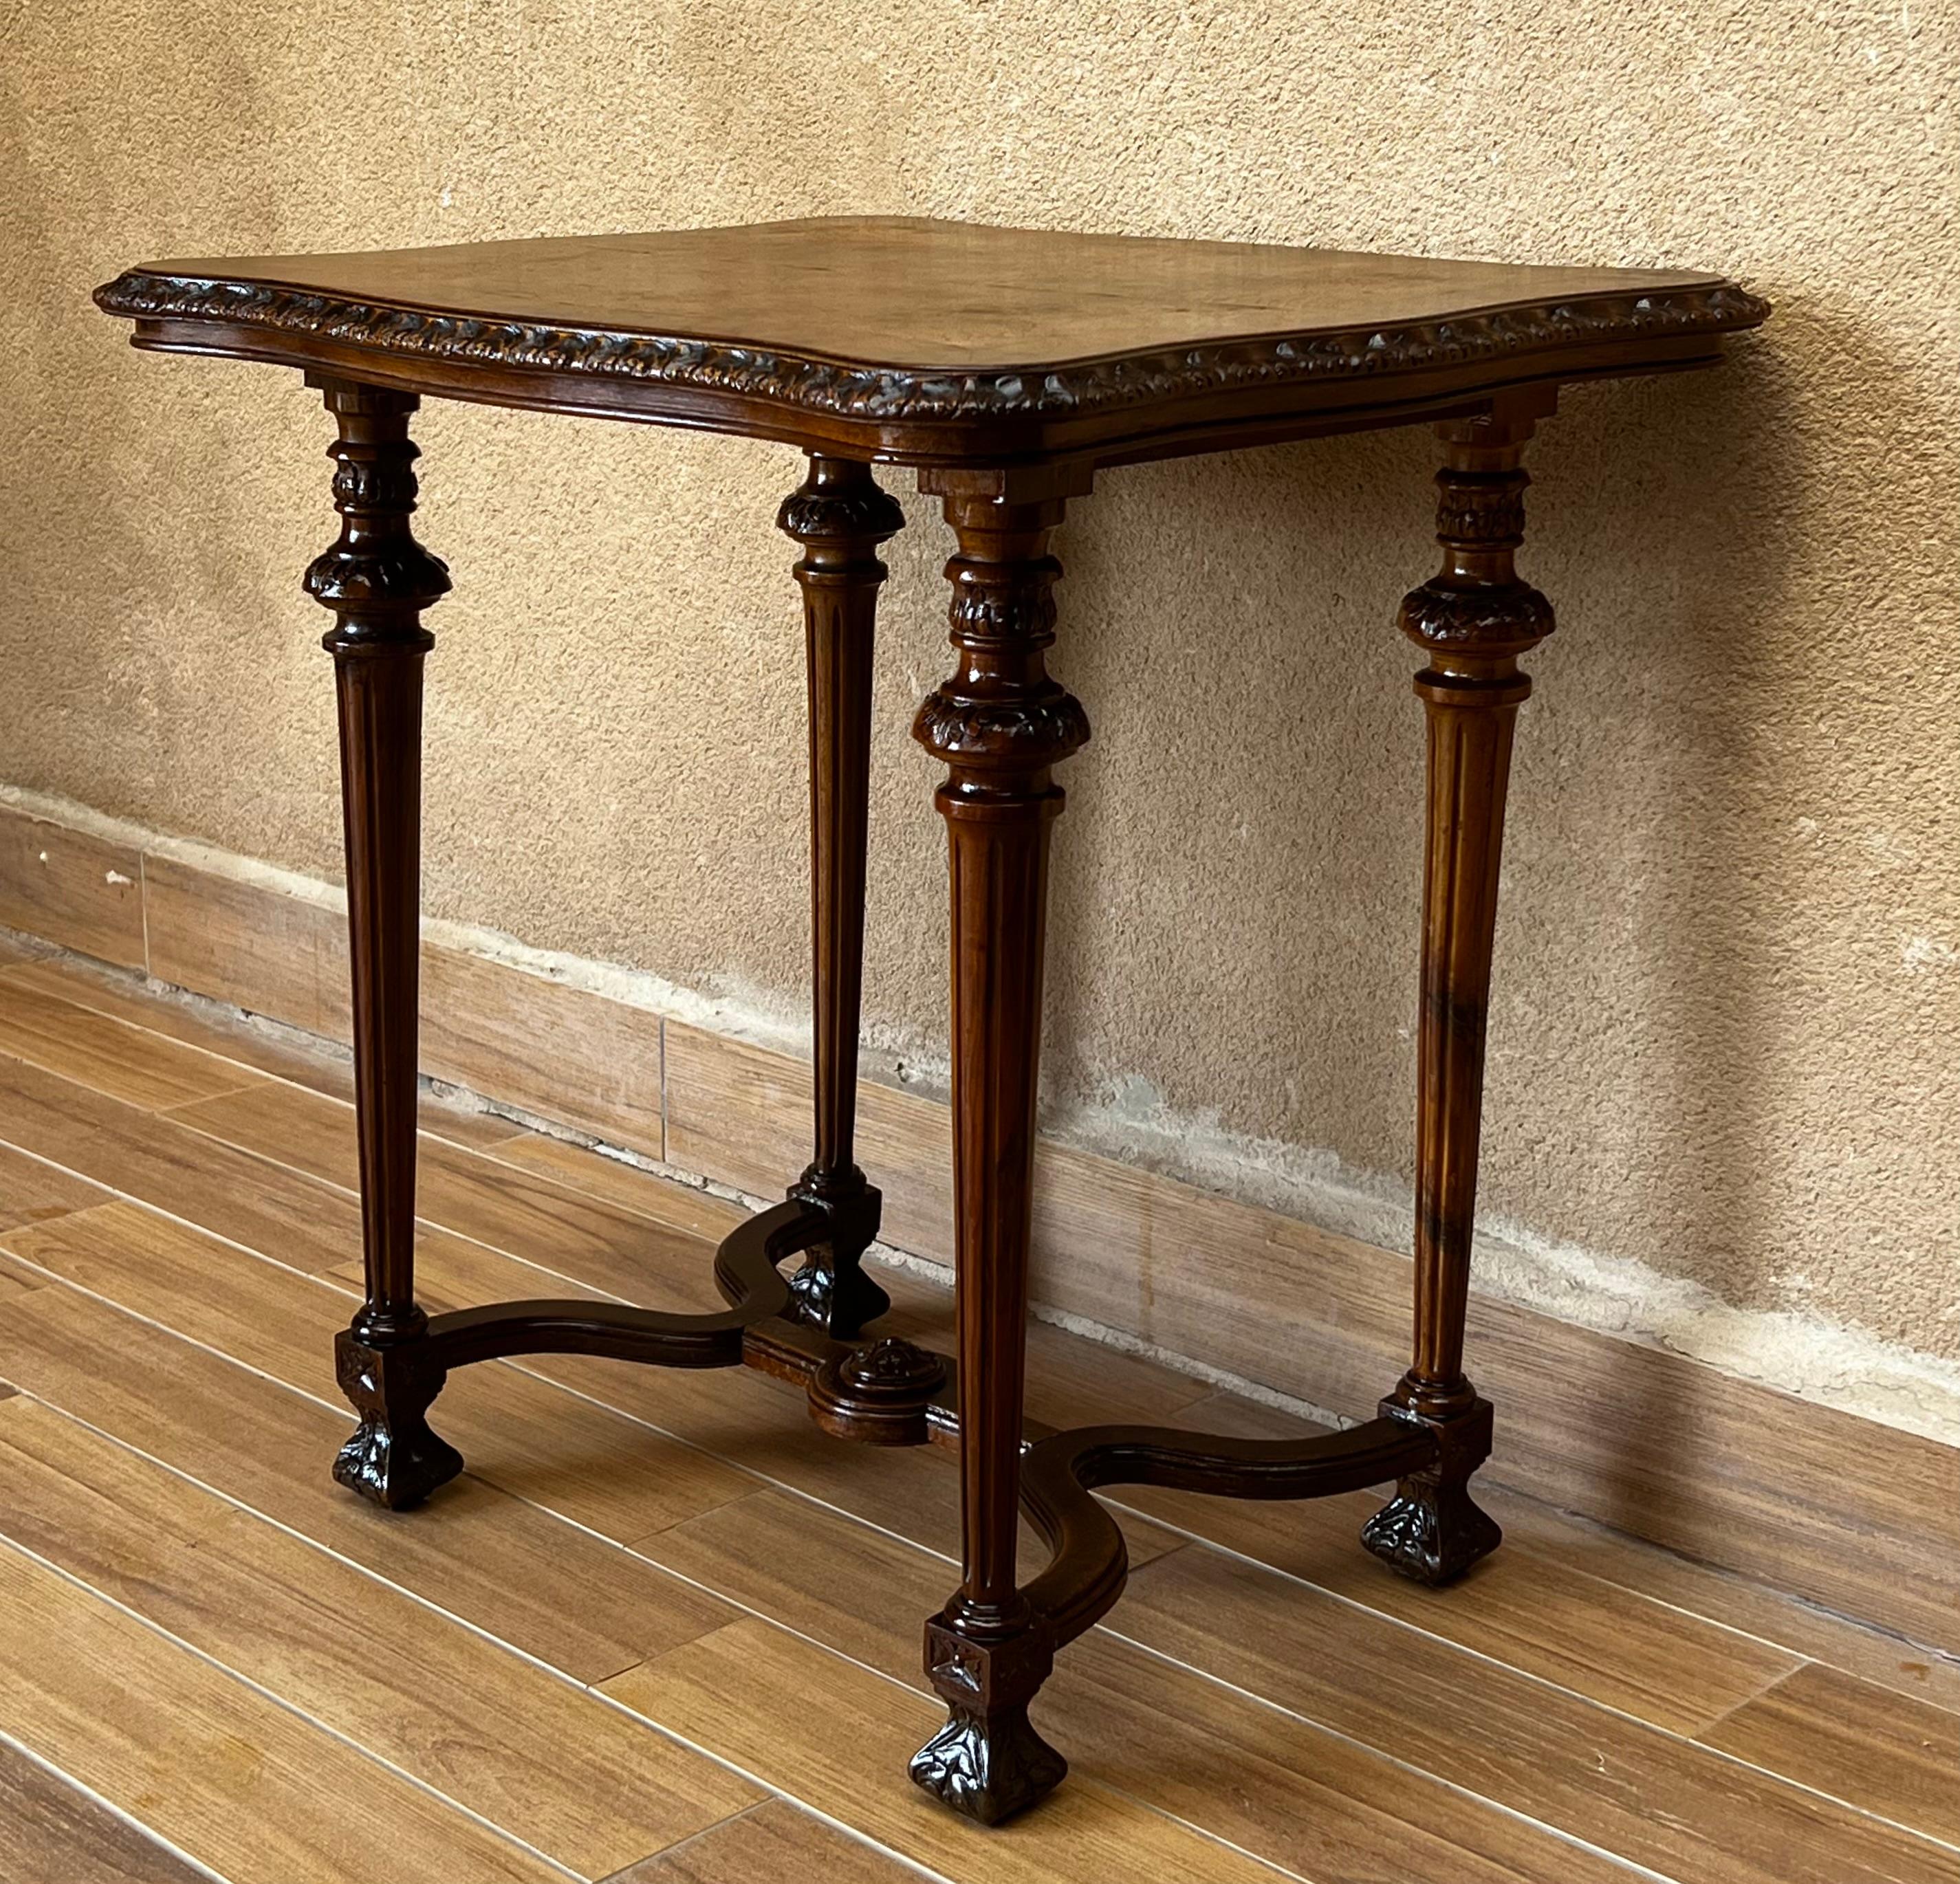 19th Century Italian 1800s Walnut Side Table with Carved Apron and Cabriole Legs